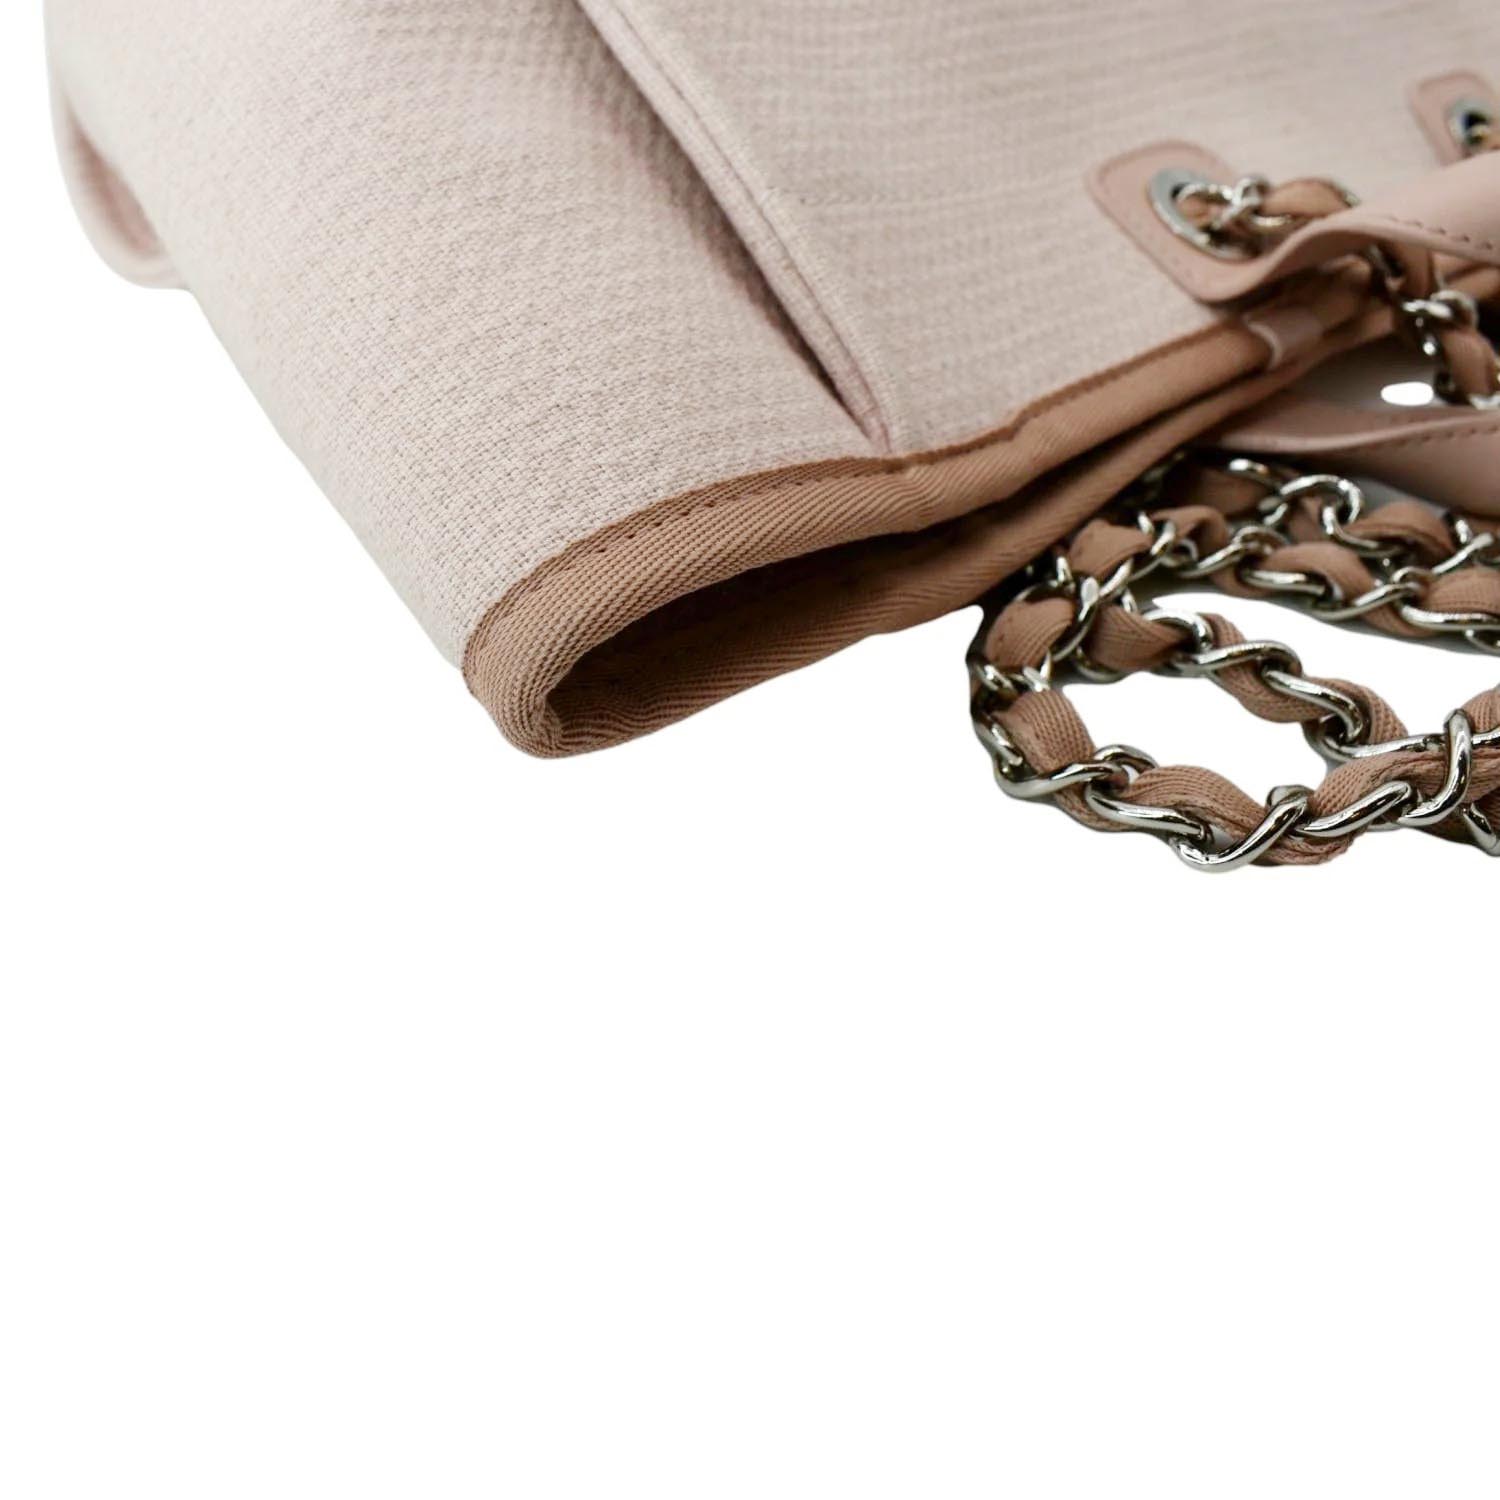 Honest Chanel Deauville Tote Review: Worth it?, by Sara Sargon, Oct, 2023